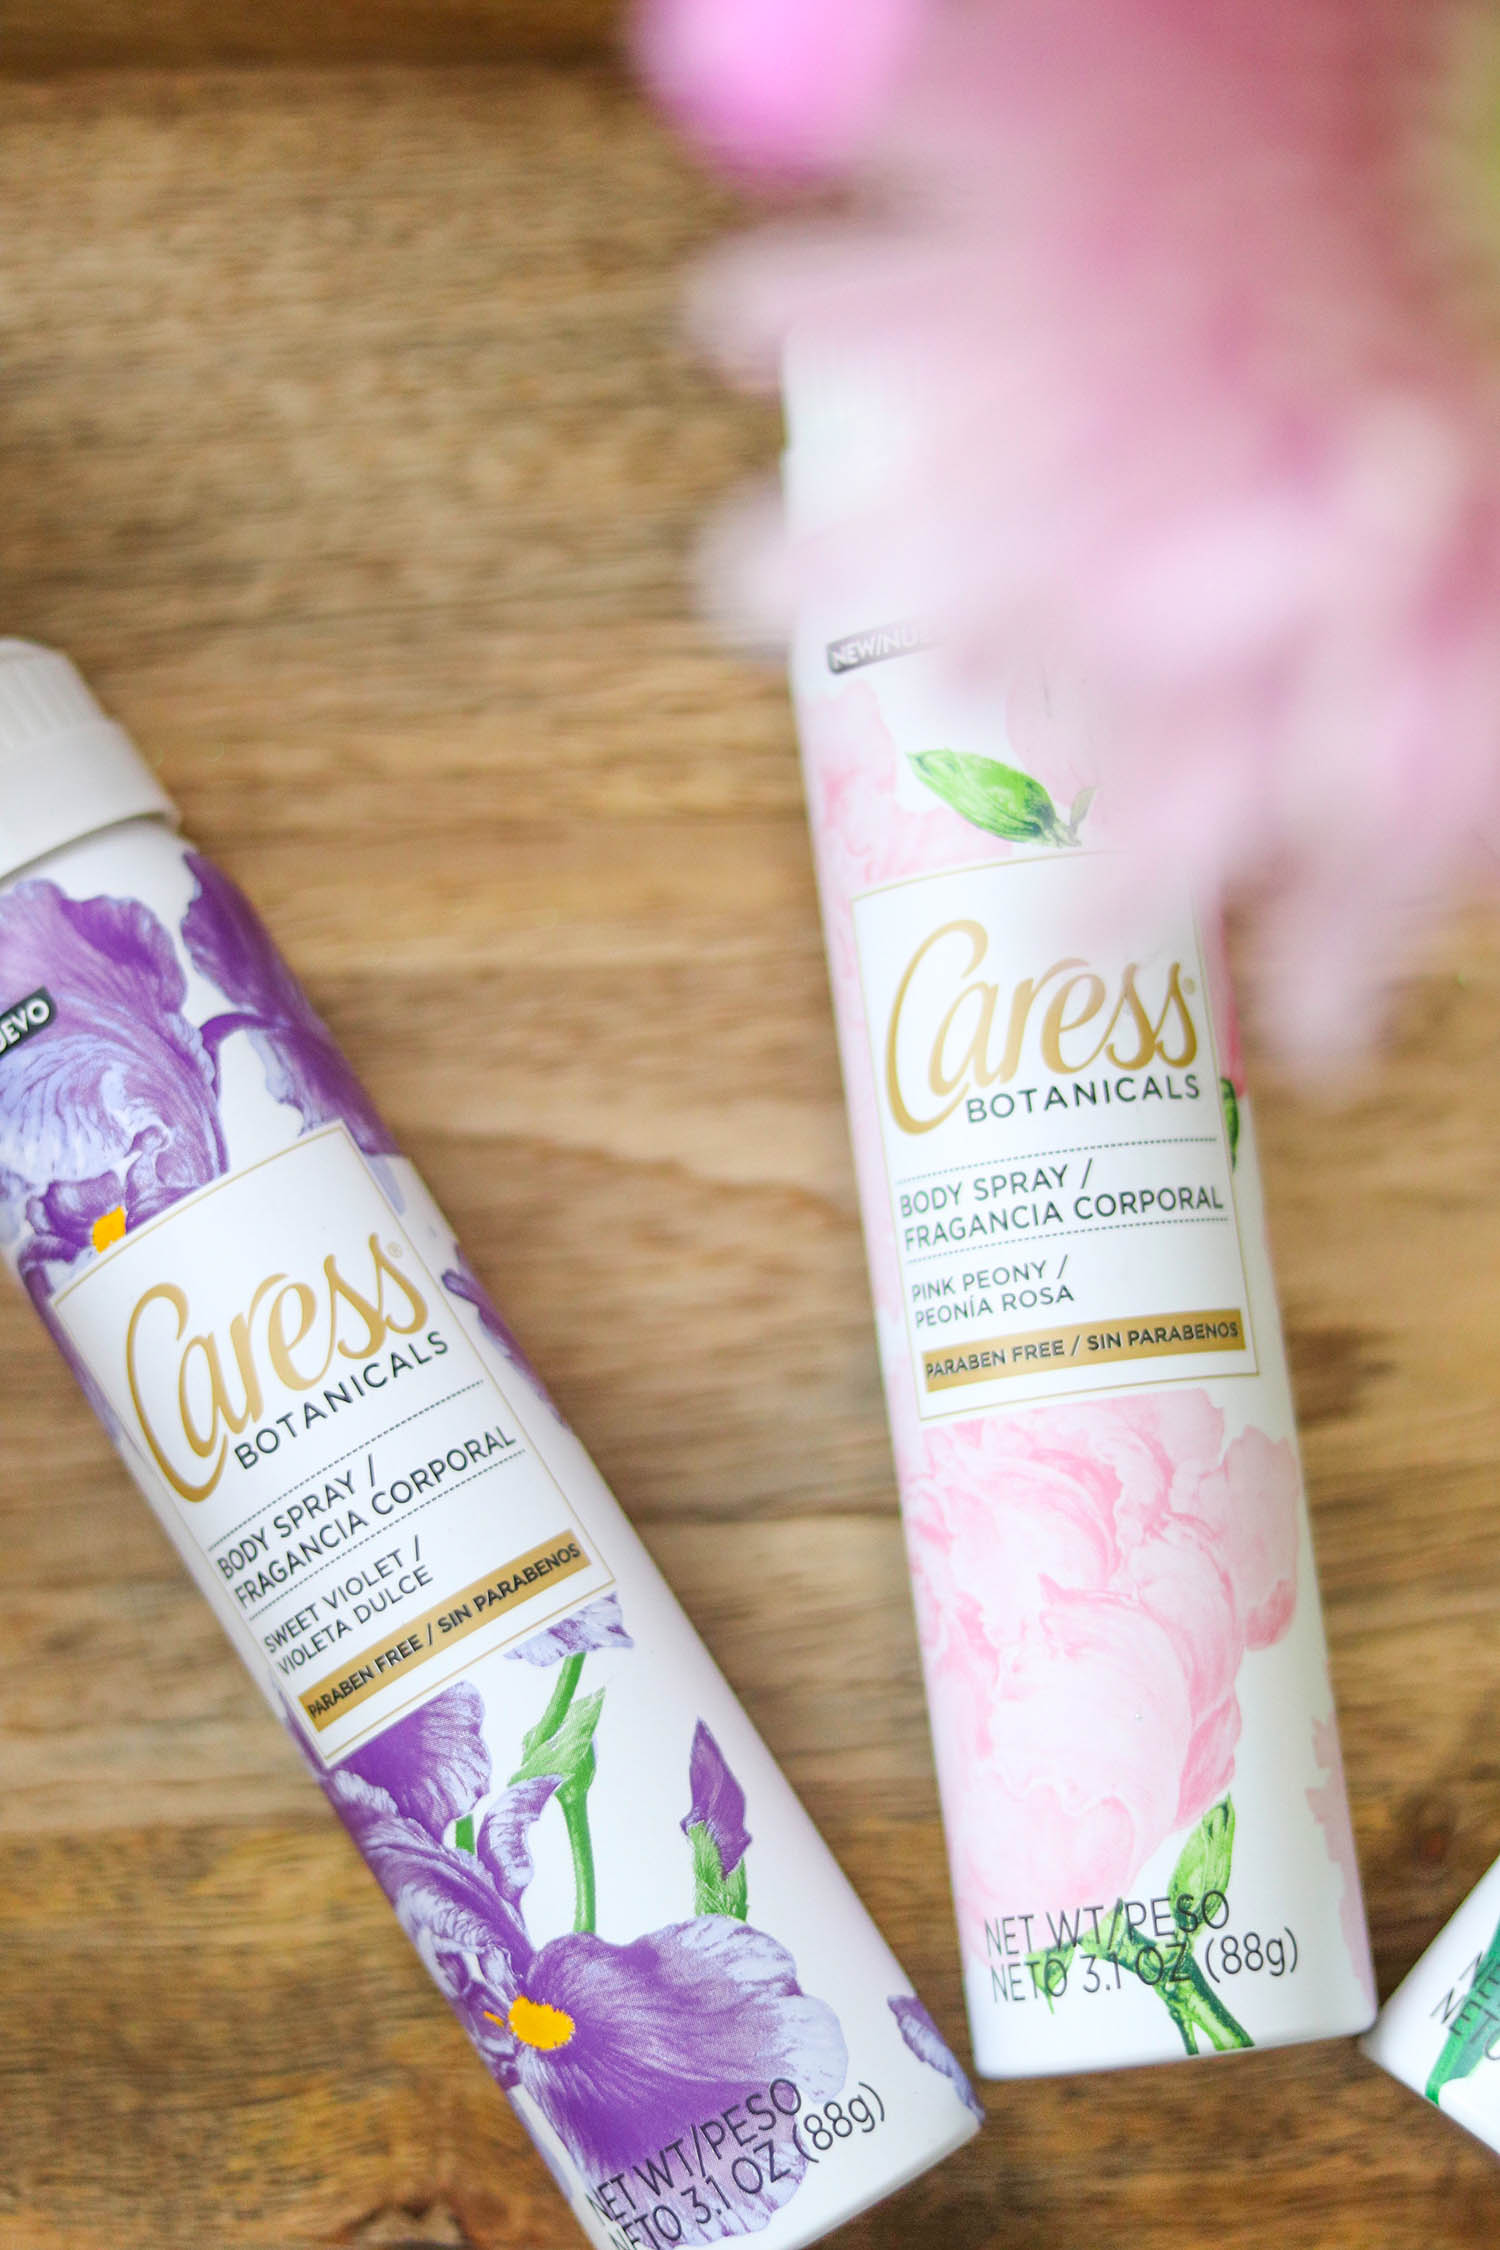 Caress Body Spray - Simple Tips to Refresh Your Spring Wardrobe